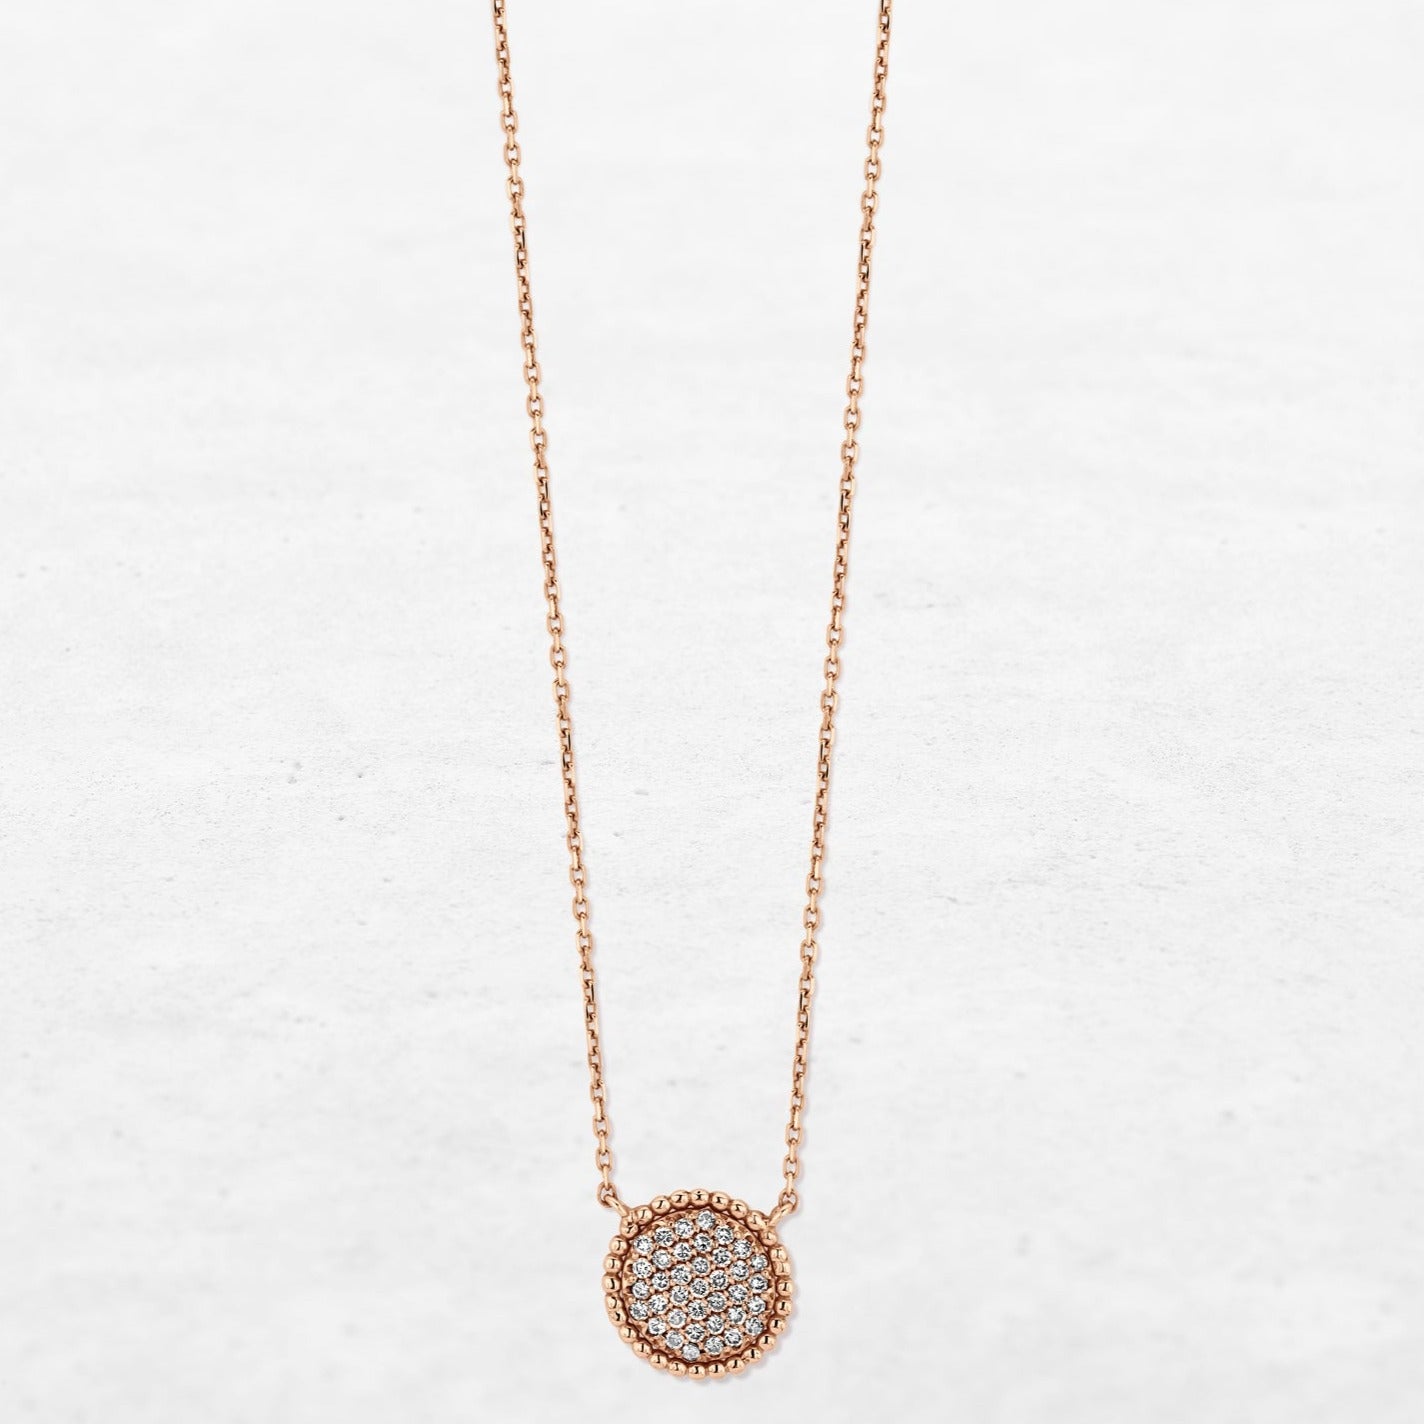 Necklace with plateau set in diamonds in rose gold made by O! Jewelry